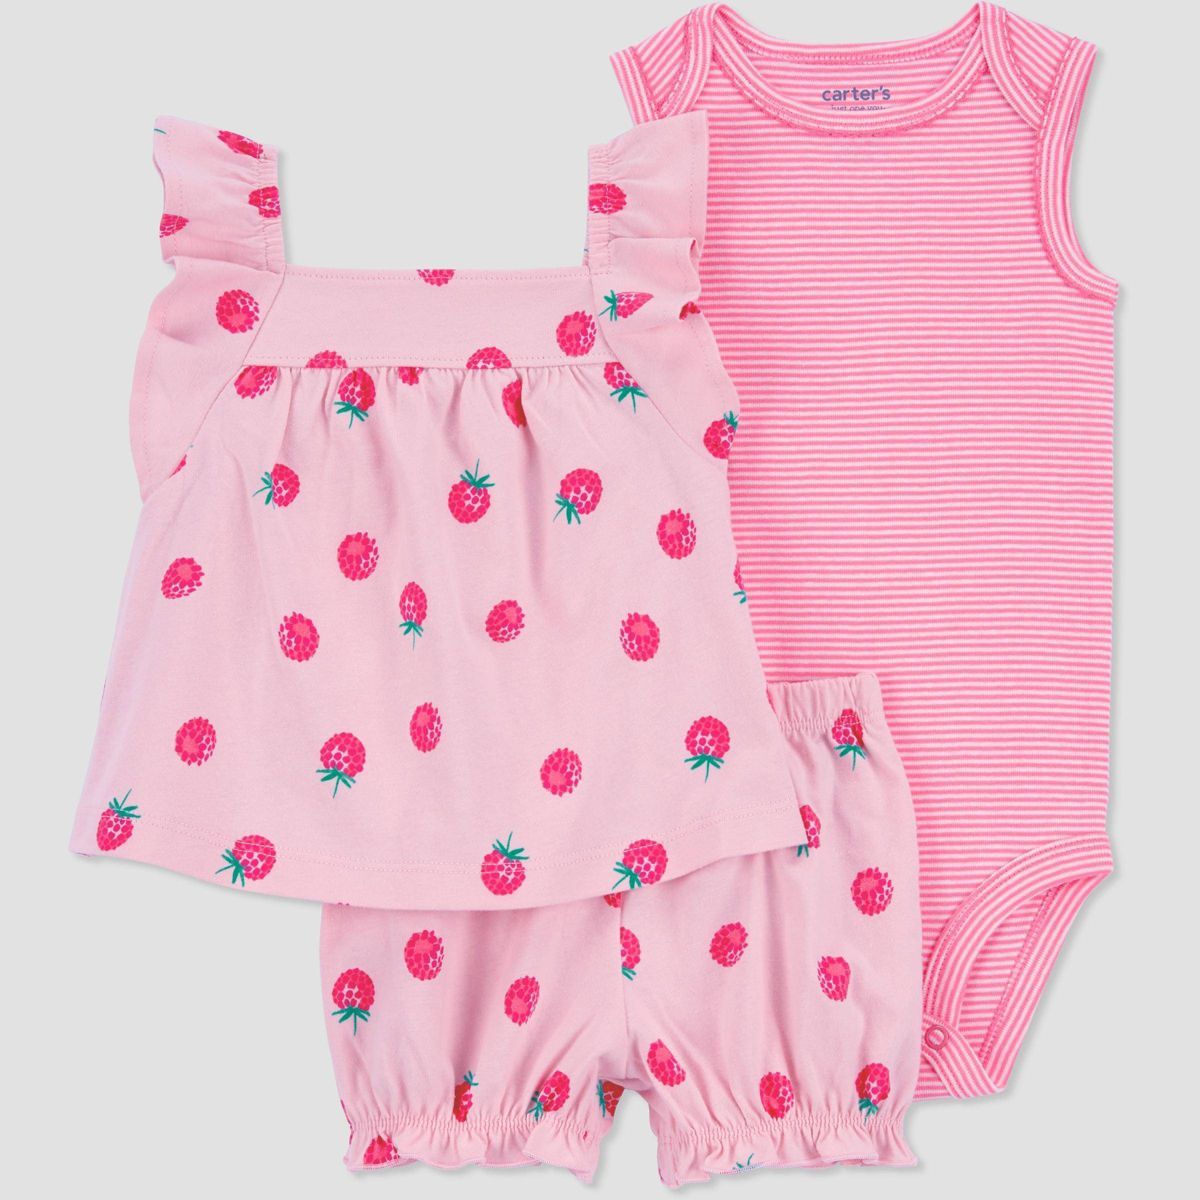 Carter's Just One You® Baby Girls' Striped Raspberries Top & Bottom Set - Pink | Target